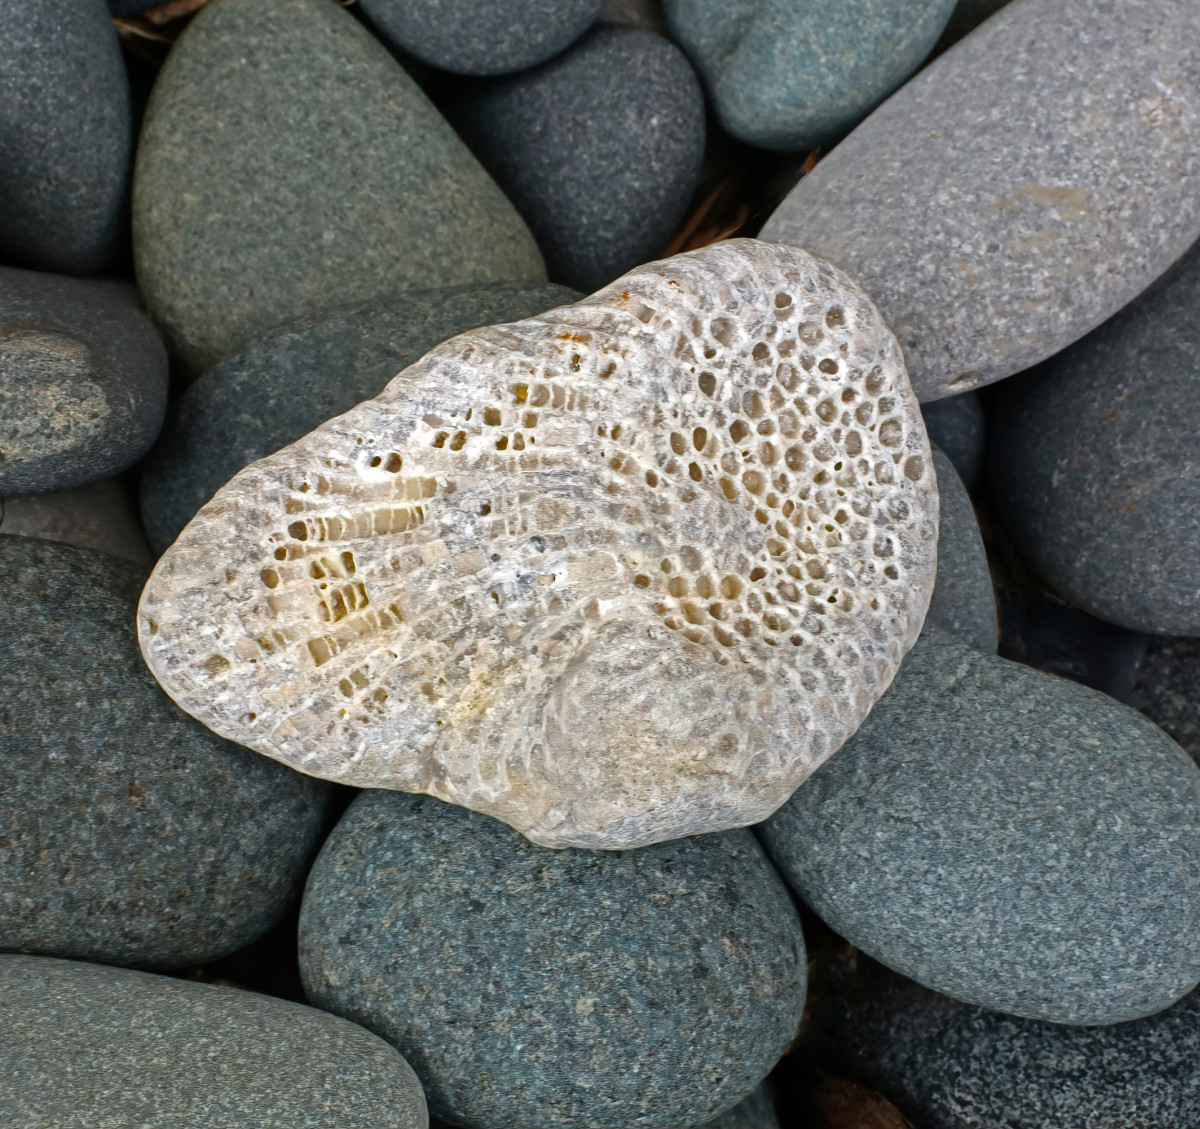 Lake Michigan Beach Favosites Honeycomb Coral Fossil (Charlevoix Stone)